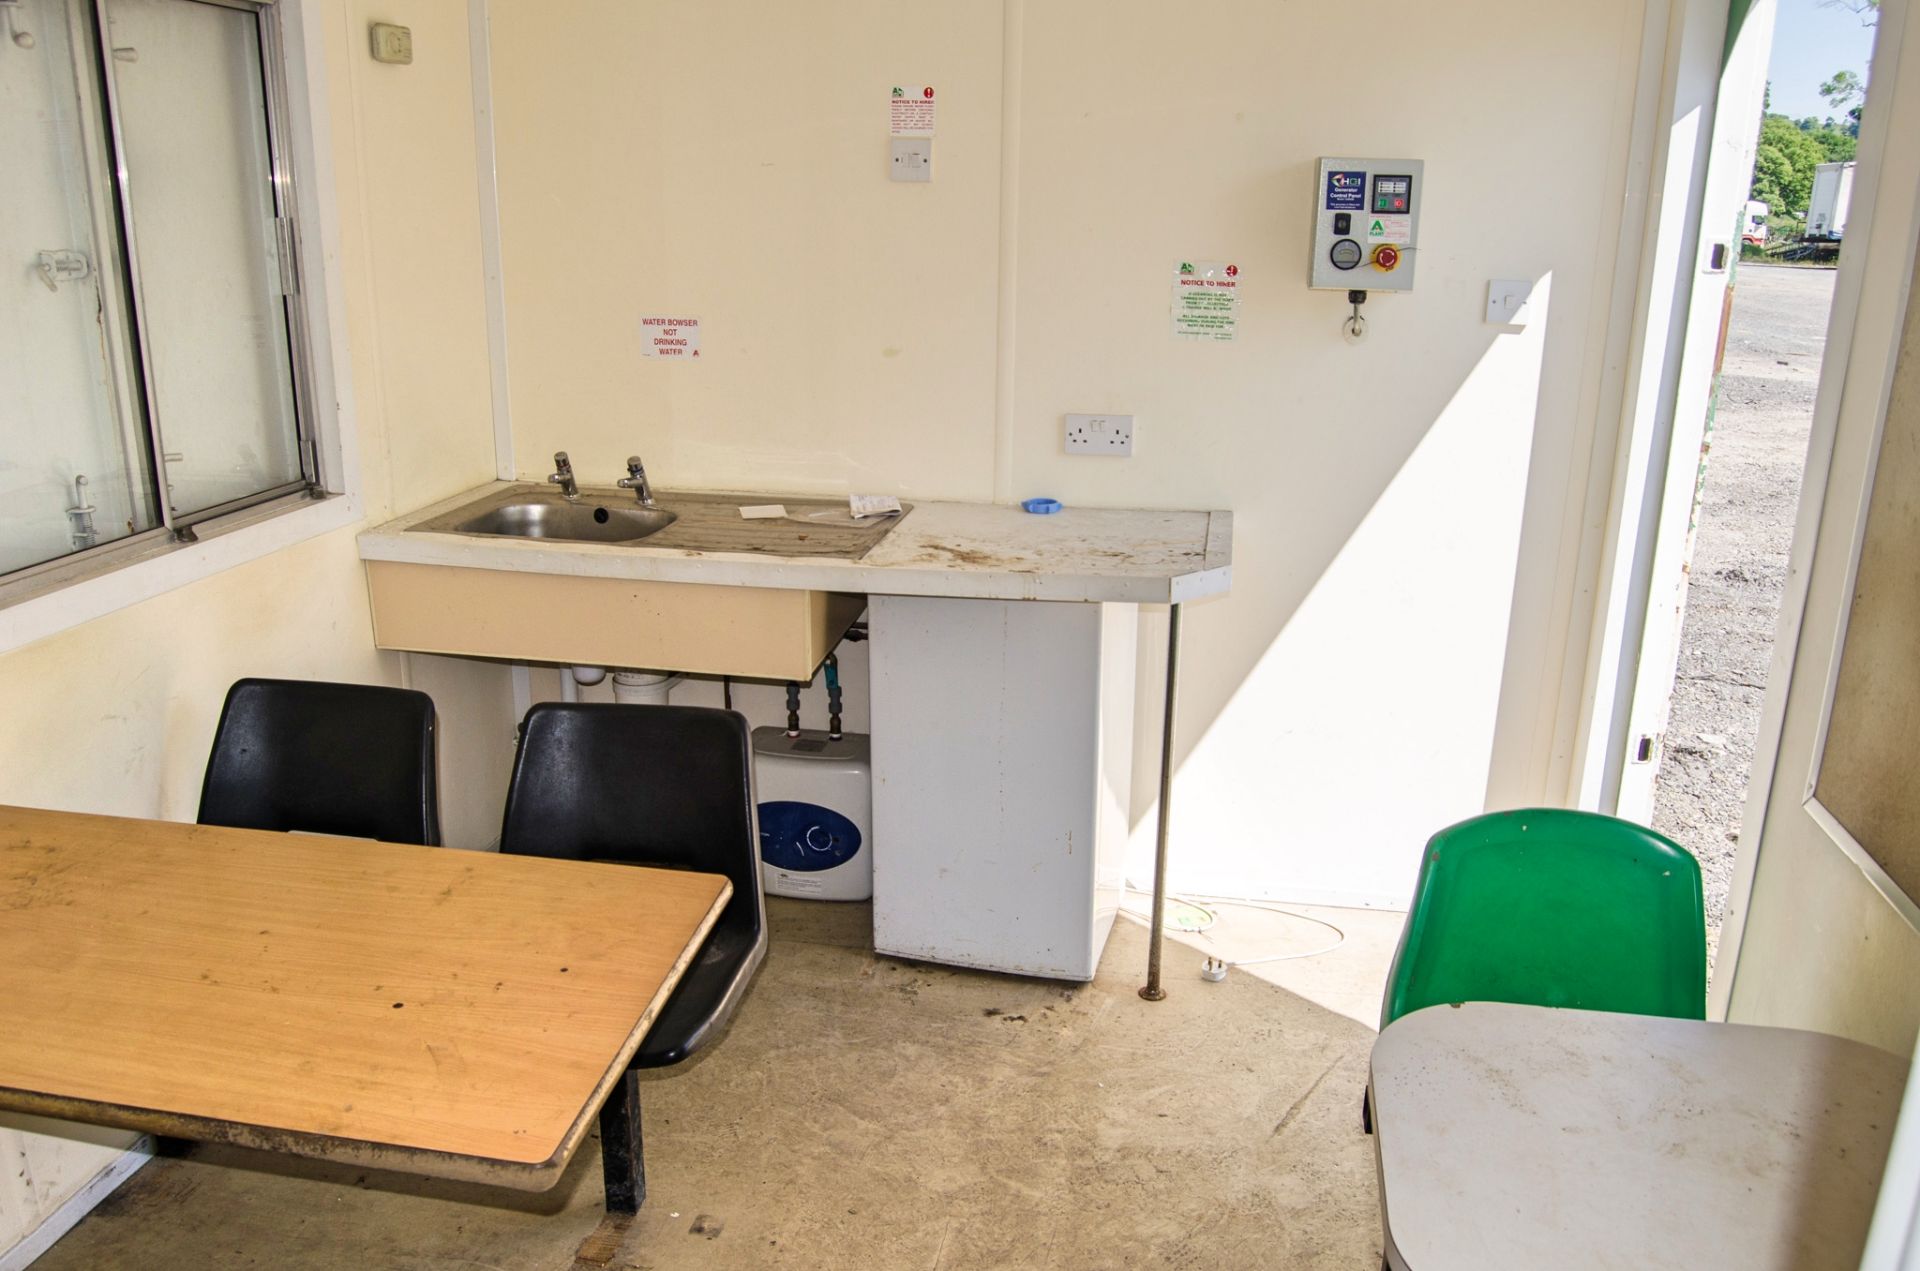 24ft x 9 ft steel anti-vandal welfare site unit Comprising of: canteen area, changing area, - Image 6 of 12